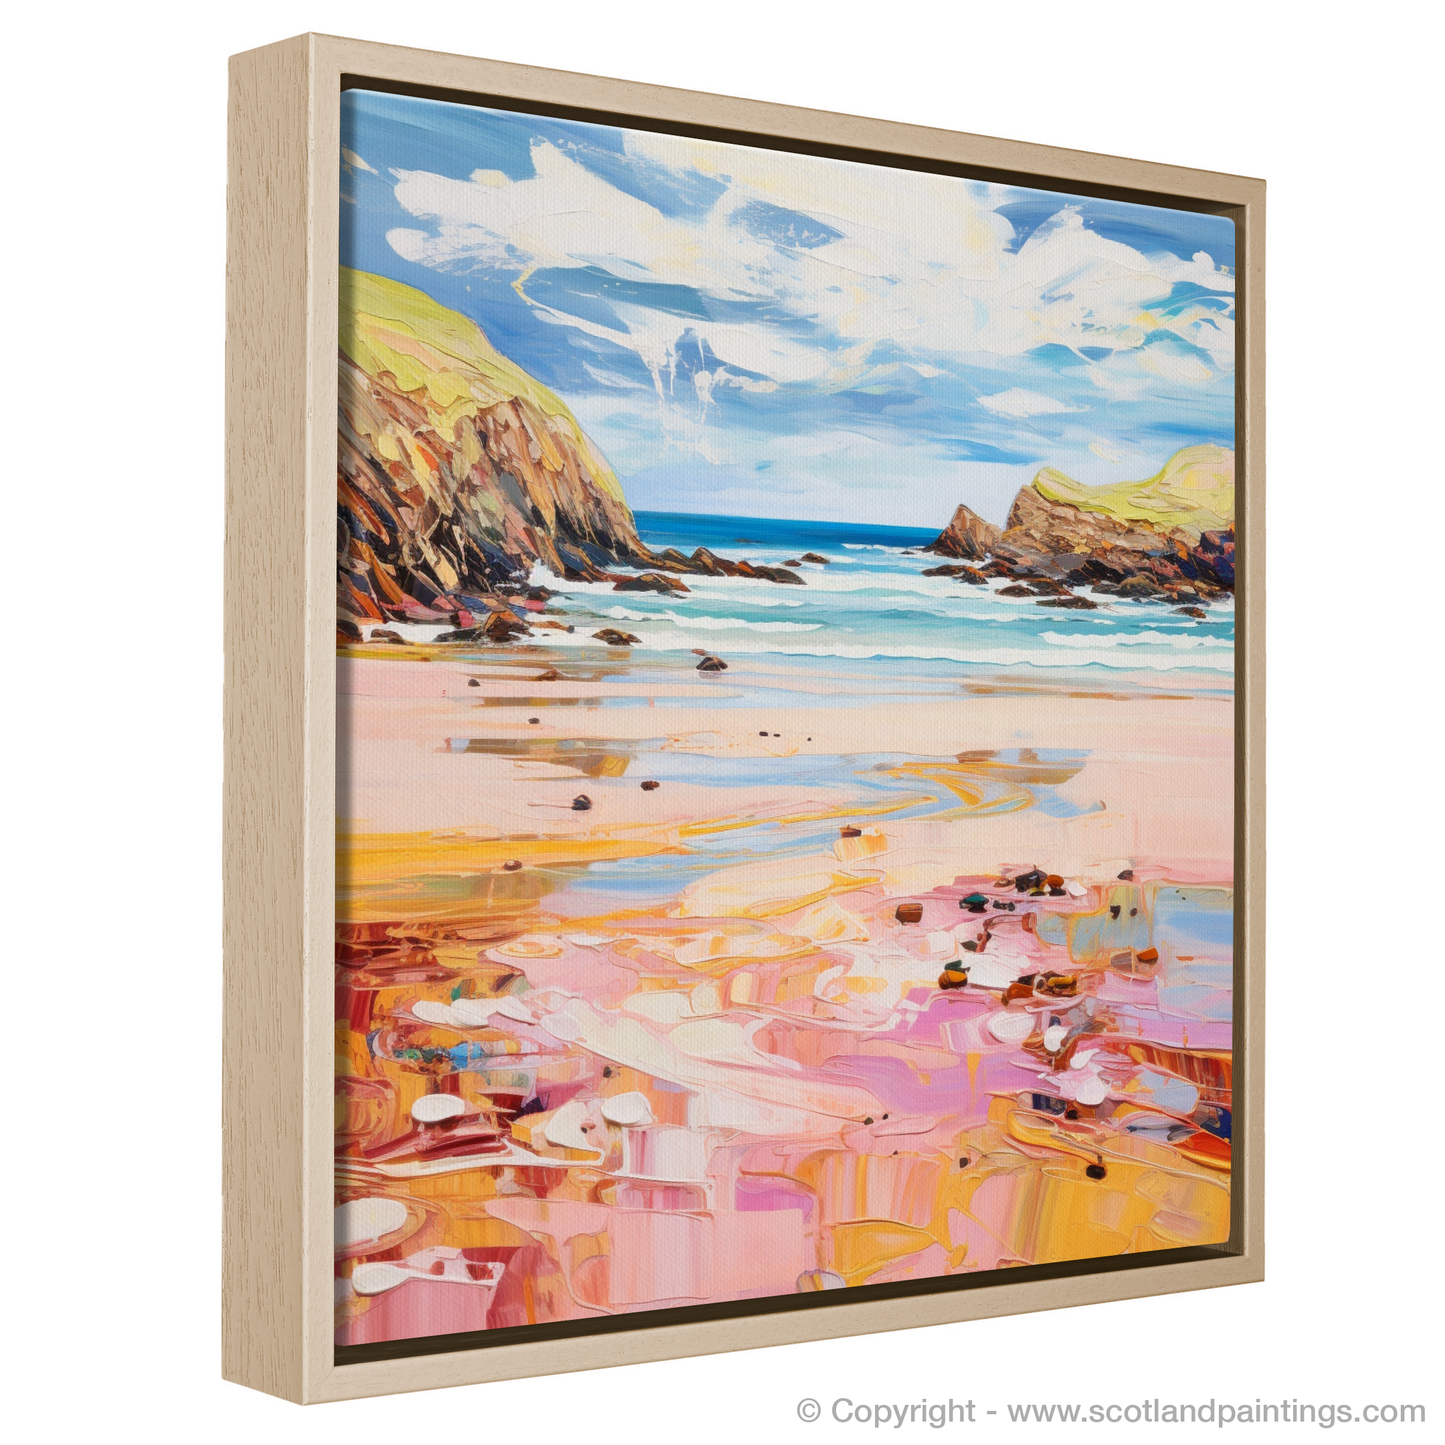 Painting and Art Print of Durness Beach, Sutherland in summer entitled "Summer Bliss at Durness Beach".